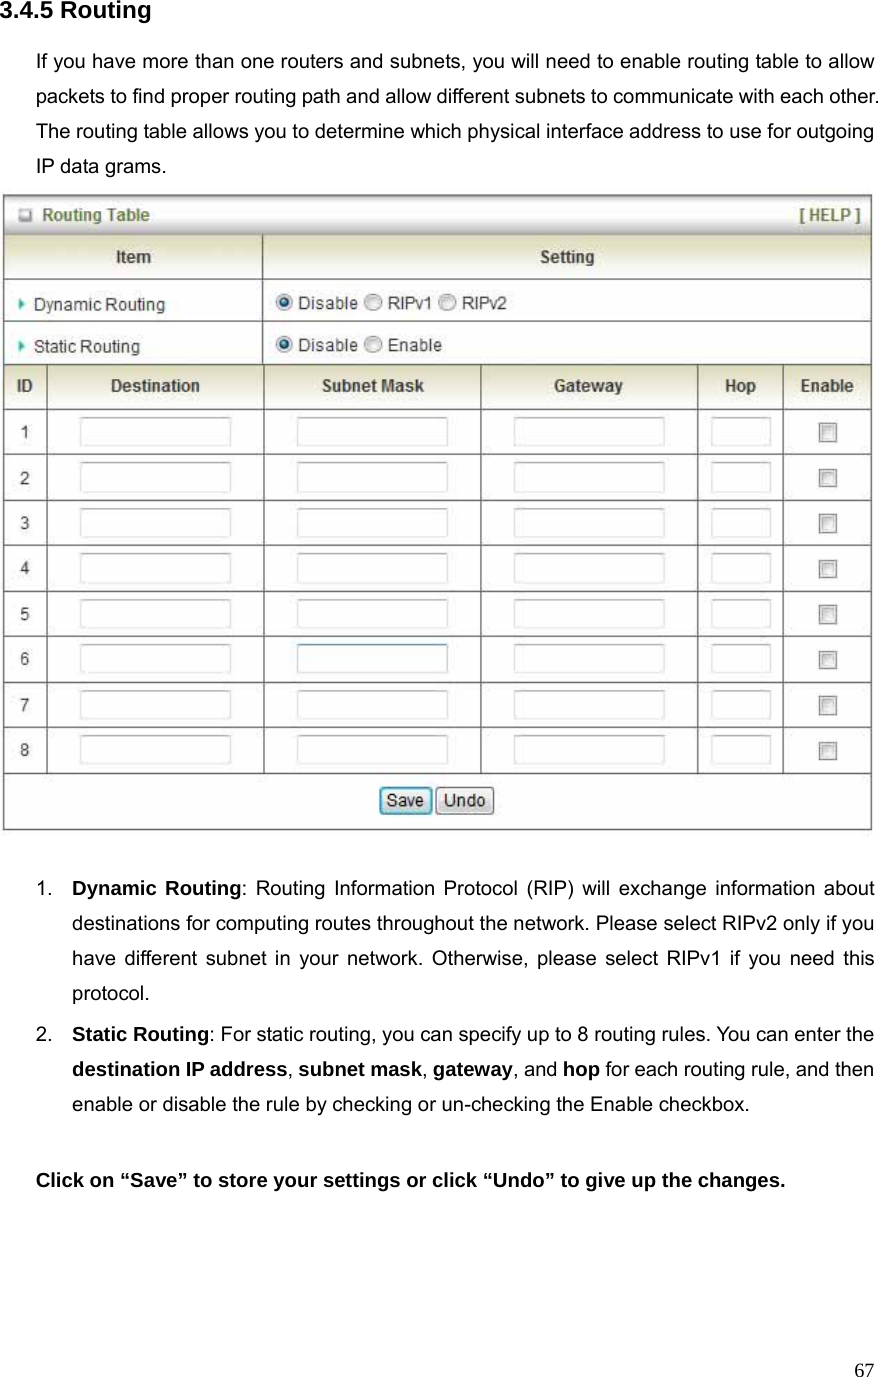  673.4.5 Routing  If you have more than one routers and subnets, you will need to enable routing table to allow packets to find proper routing path and allow different subnets to communicate with each other. The routing table allows you to determine which physical interface address to use for outgoing IP data grams.   1.  Dynamic Routing: Routing Information Protocol (RIP) will exchange information about destinations for computing routes throughout the network. Please select RIPv2 only if you have different subnet in your network. Otherwise, please select RIPv1 if you need this protocol. 2.  Static Routing: For static routing, you can specify up to 8 routing rules. You can enter the destination IP address, subnet mask, gateway, and hop for each routing rule, and then enable or disable the rule by checking or un-checking the Enable checkbox.  Click on “Save” to store your settings or click “Undo” to give up the changes.    